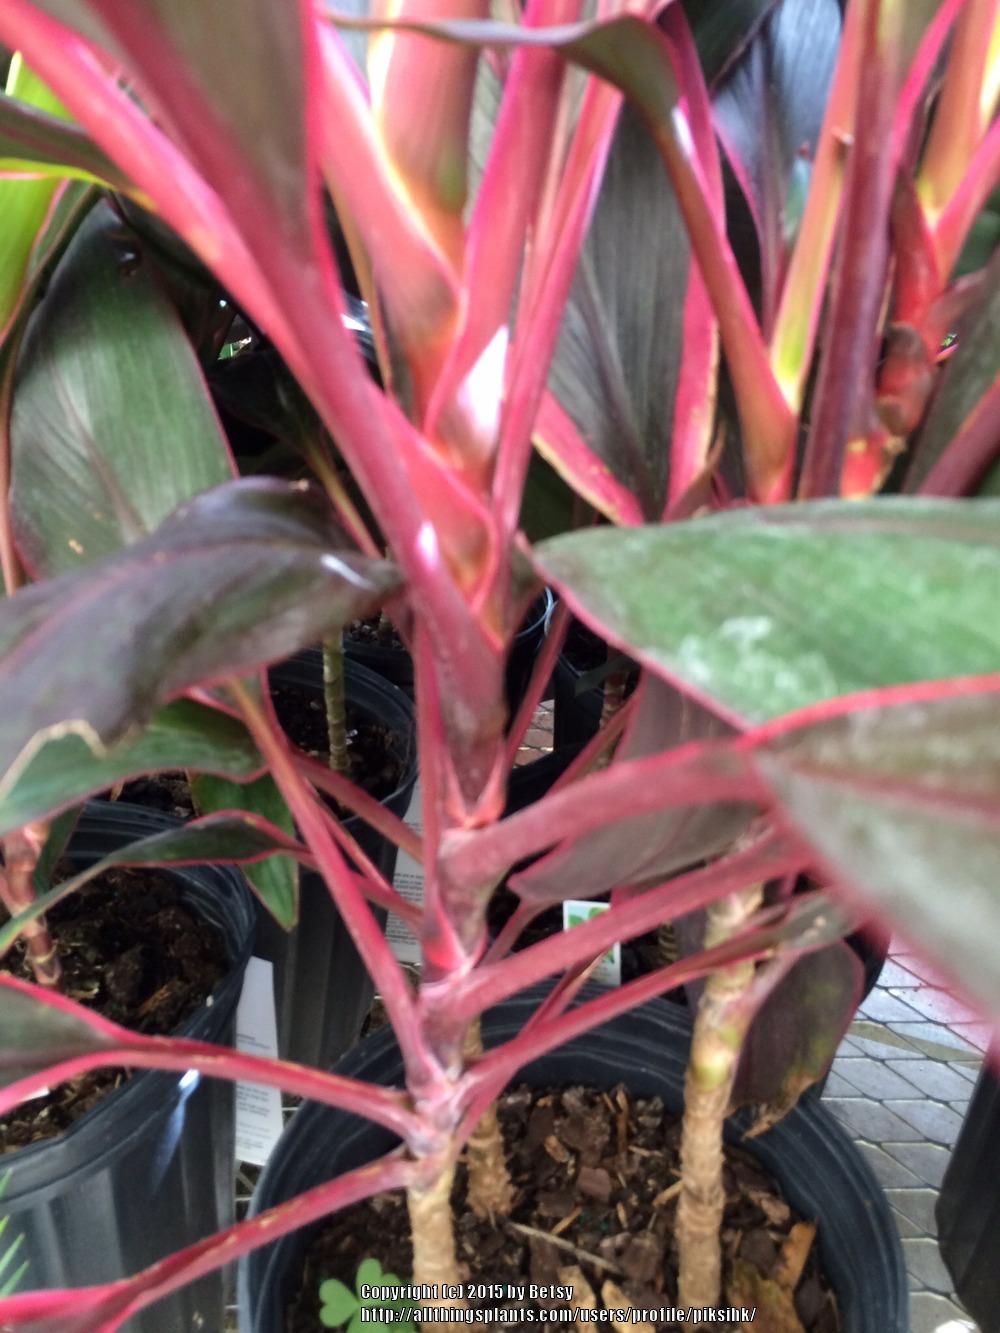 Photo of Ti Plant (Cordyline fruticosa 'Red Sister') uploaded by piksihk